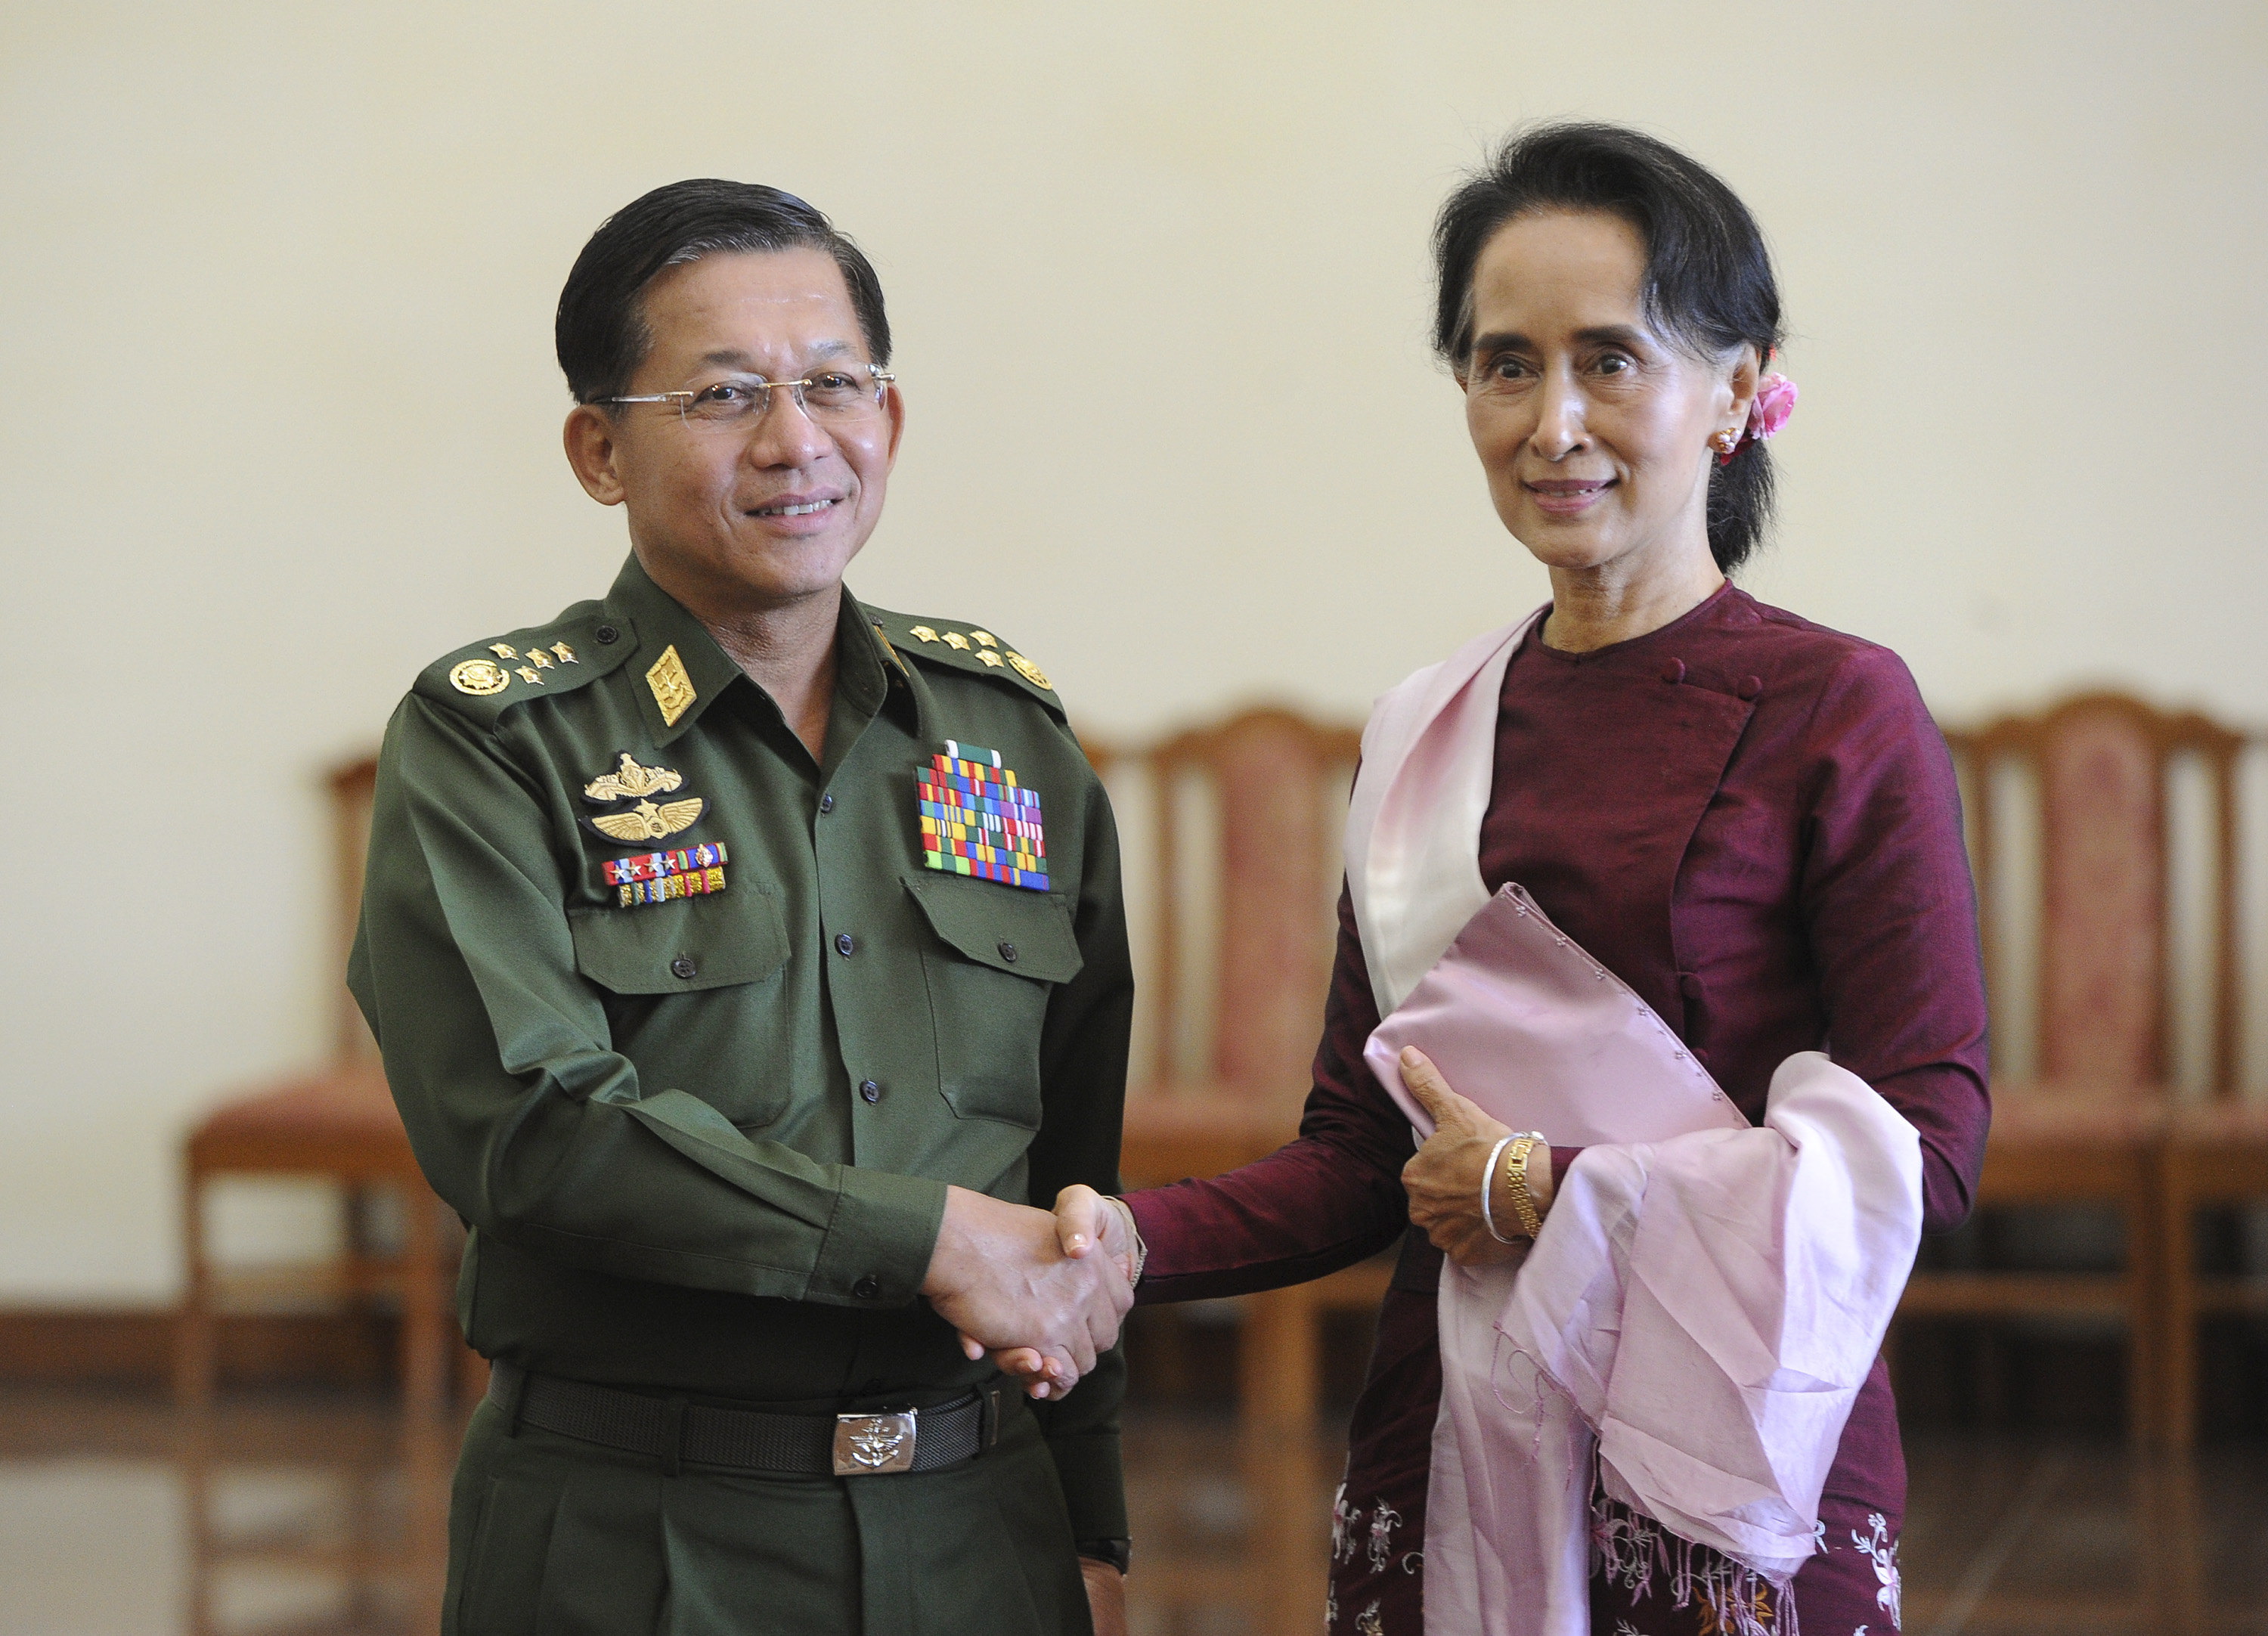 Burma's Commander in Chief Min Aung Hlaing and National League for Democracy (NLD) party leader Aung San Suu Kyi in Naypyidaw, Burma, on Dec. 2, 2015 (Phyo Hein Kyaw—Reuters)